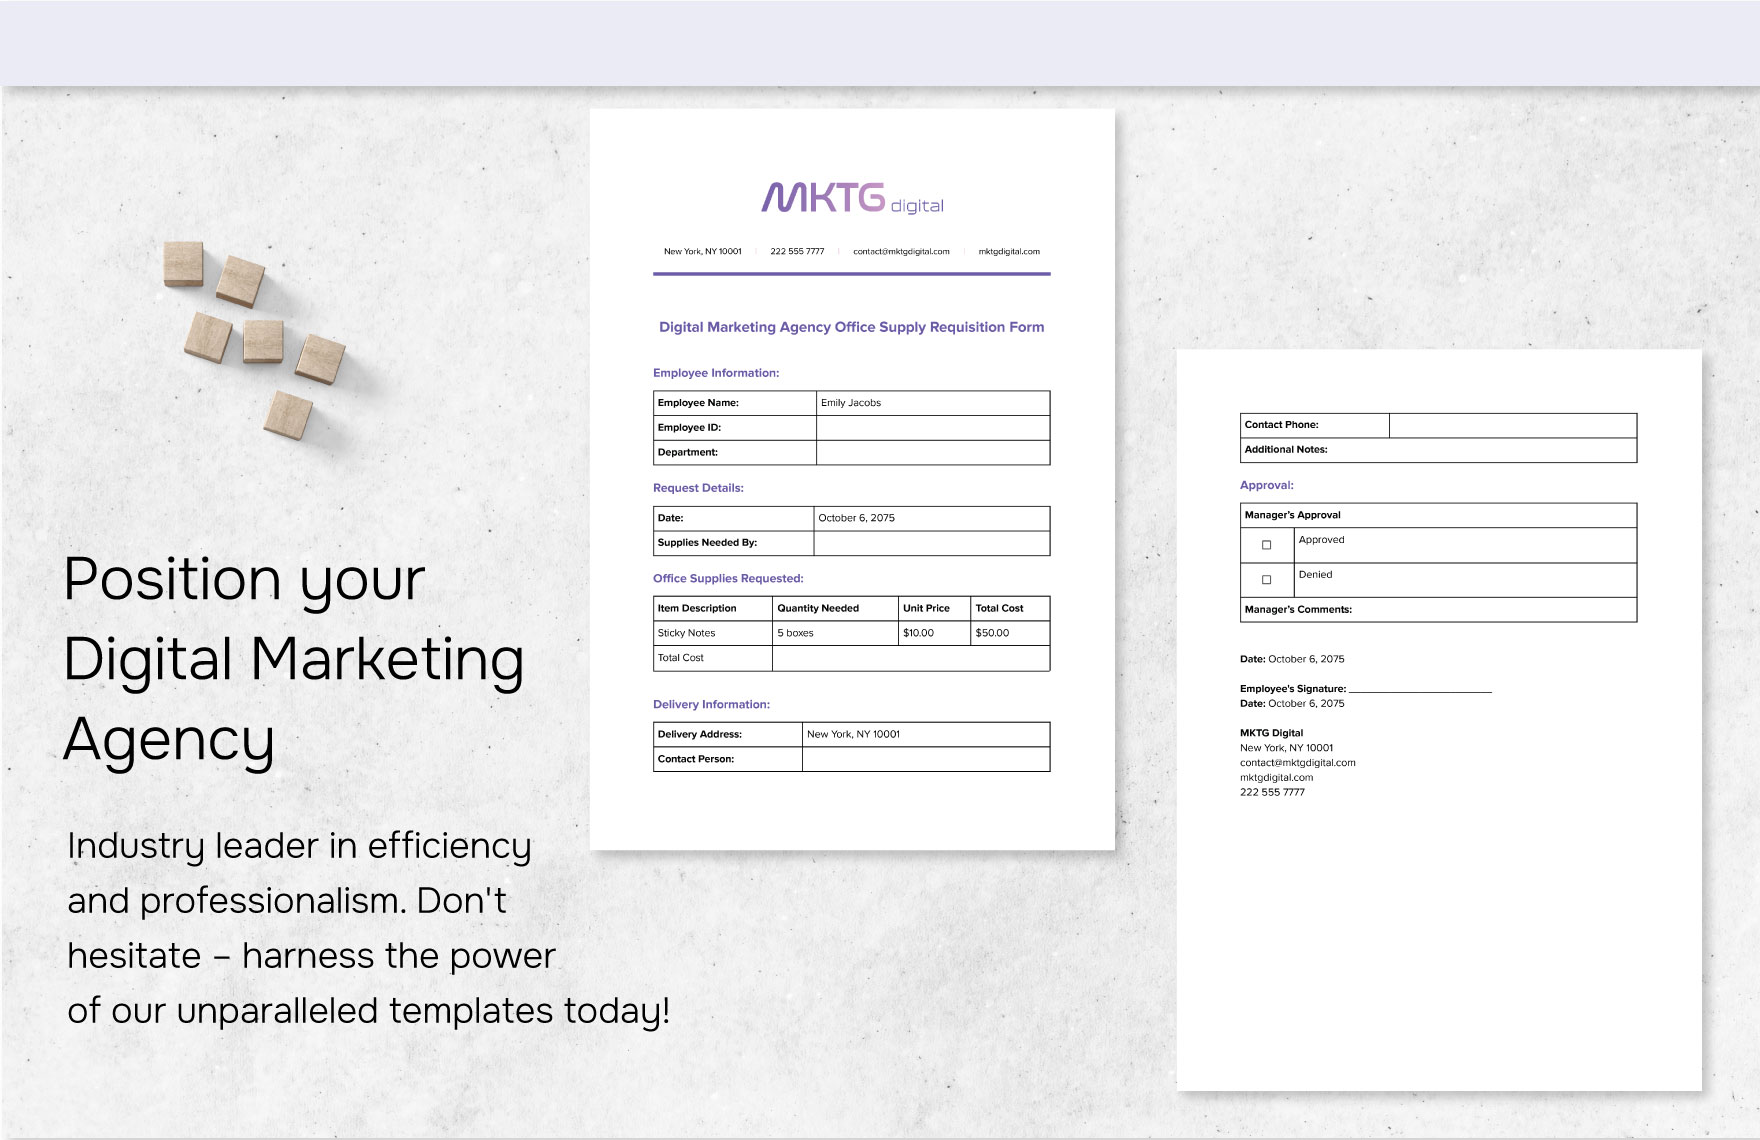 Digital Marketing Agency Office Supply Requisition Form Template